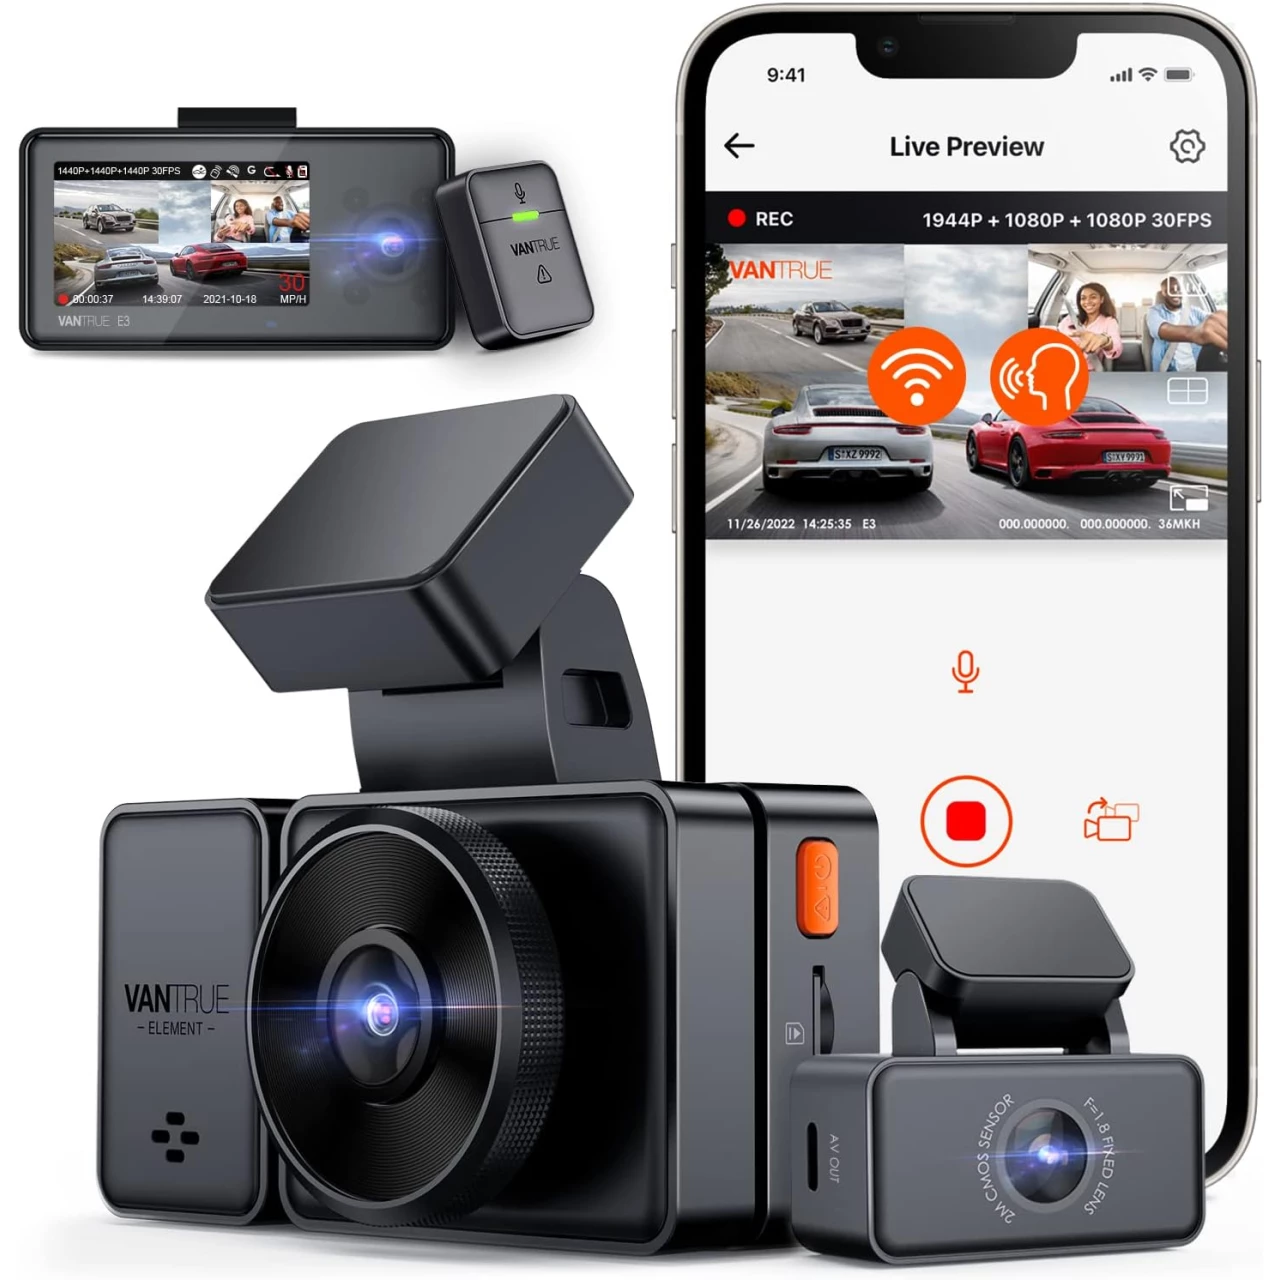 Vantrue E3 3 Channel WiFi GPS Dash Cam, 2.5K+1080P Front and Rear, Front and Inside, 1944P+1080P+1080P 3 Way Dash Camera, Voice Control, IR Night Vision, 24 Hrs Parking Mode, Support 512GB Max